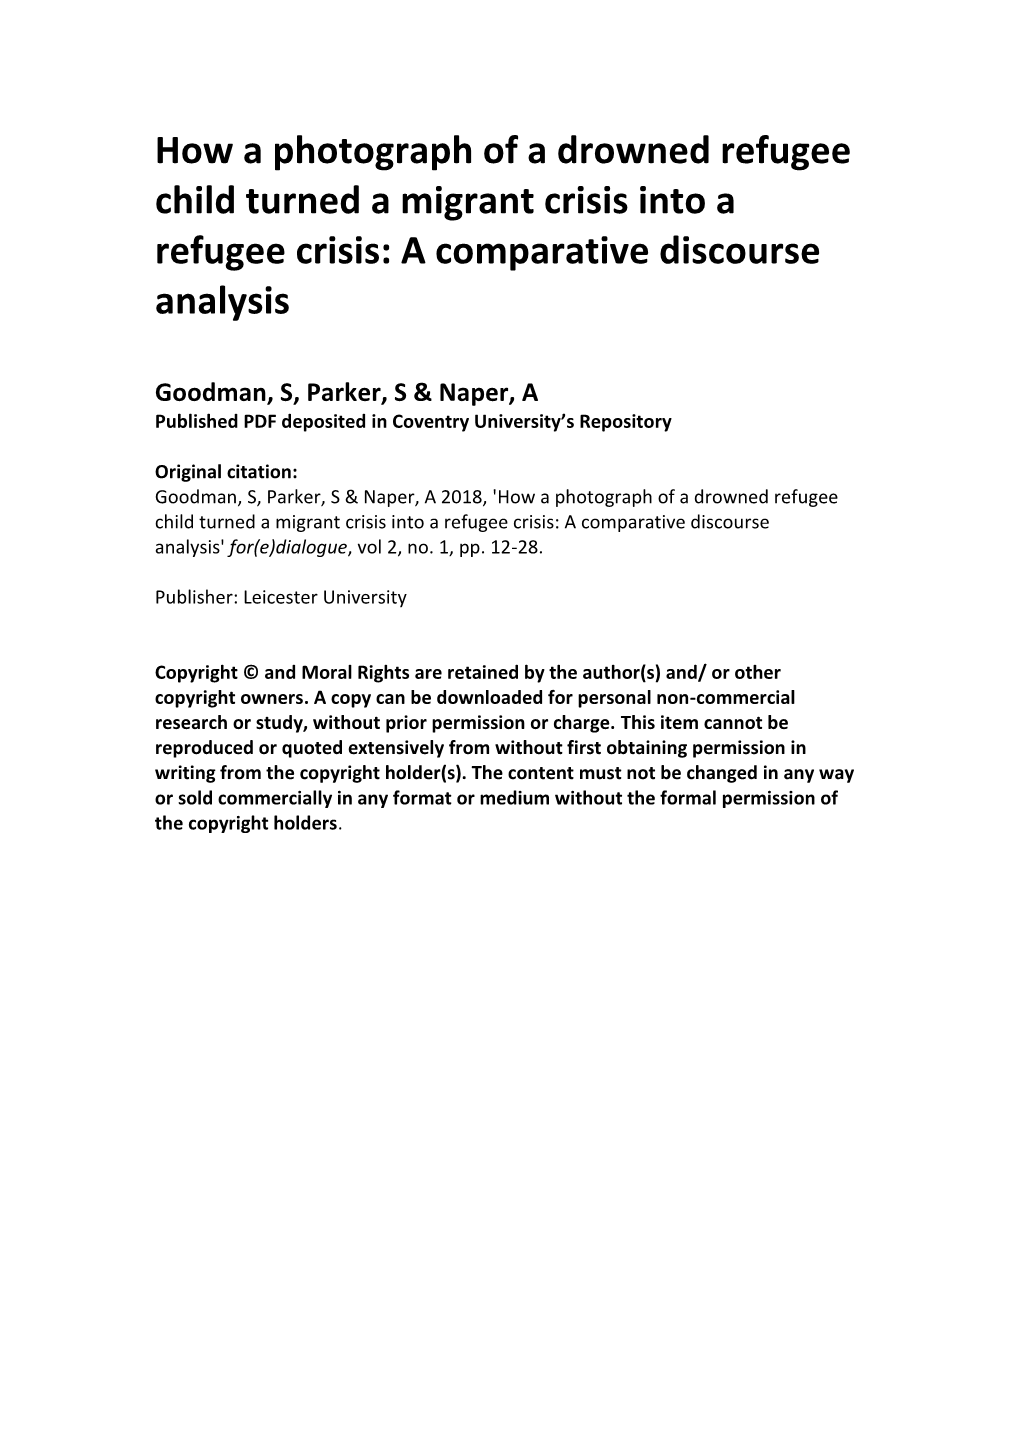 How a Photograph of a Drowned Refugee Child Turned a Migrant Crisis Into a Refugee Crisis: a Comparative Discourse Analysis